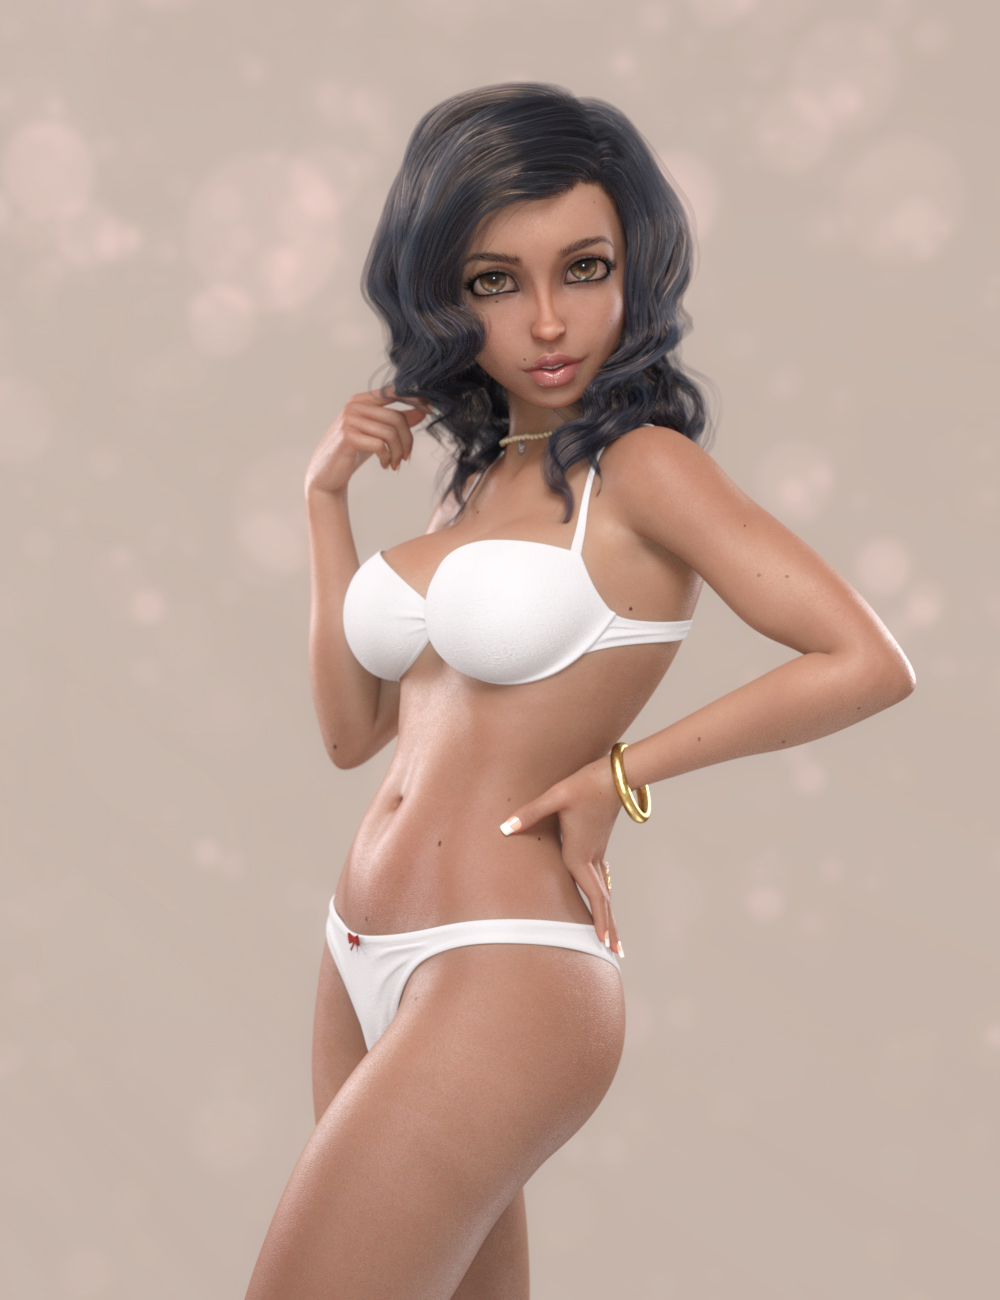 Vanille for The Girl 8 by: VincentXyooj, 3D Models by Daz 3D